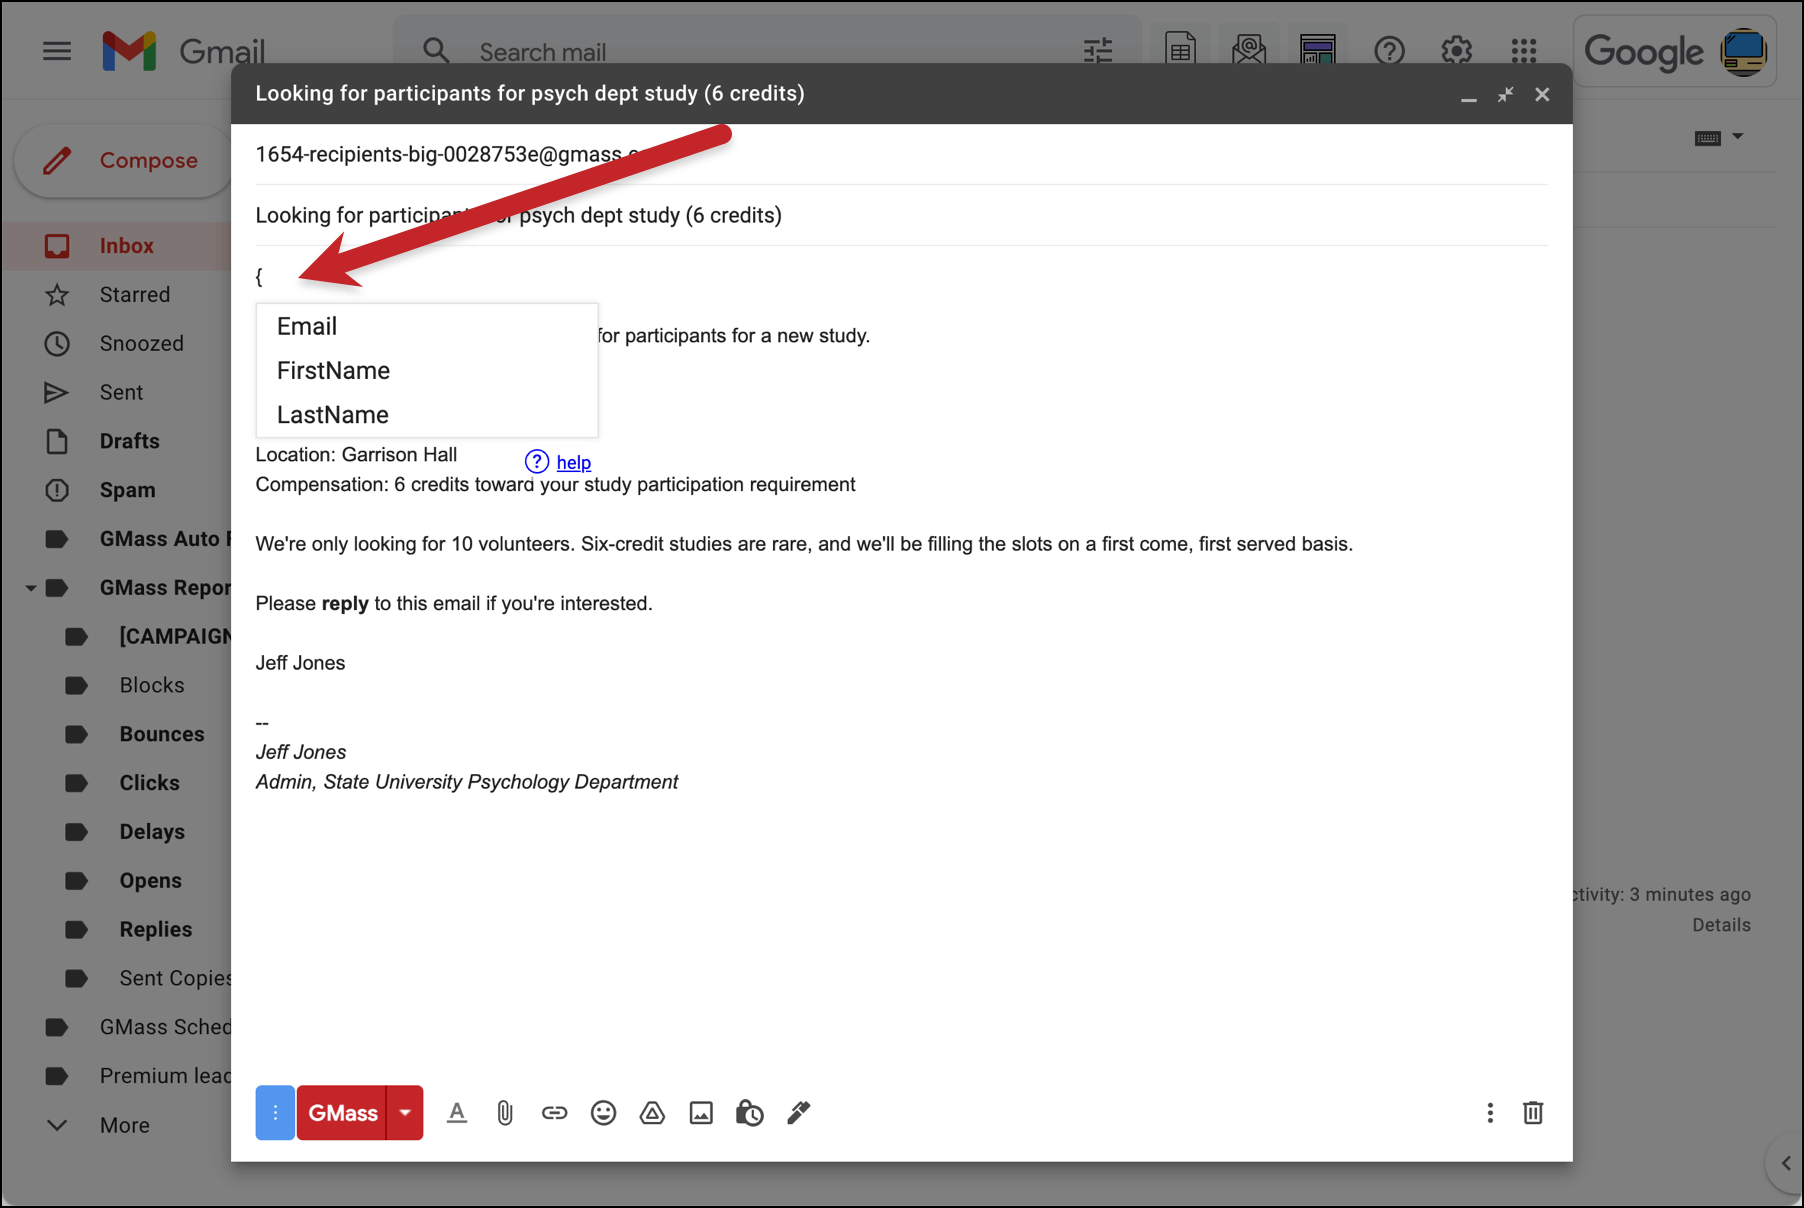 Left curly brace brings up mail merge fields